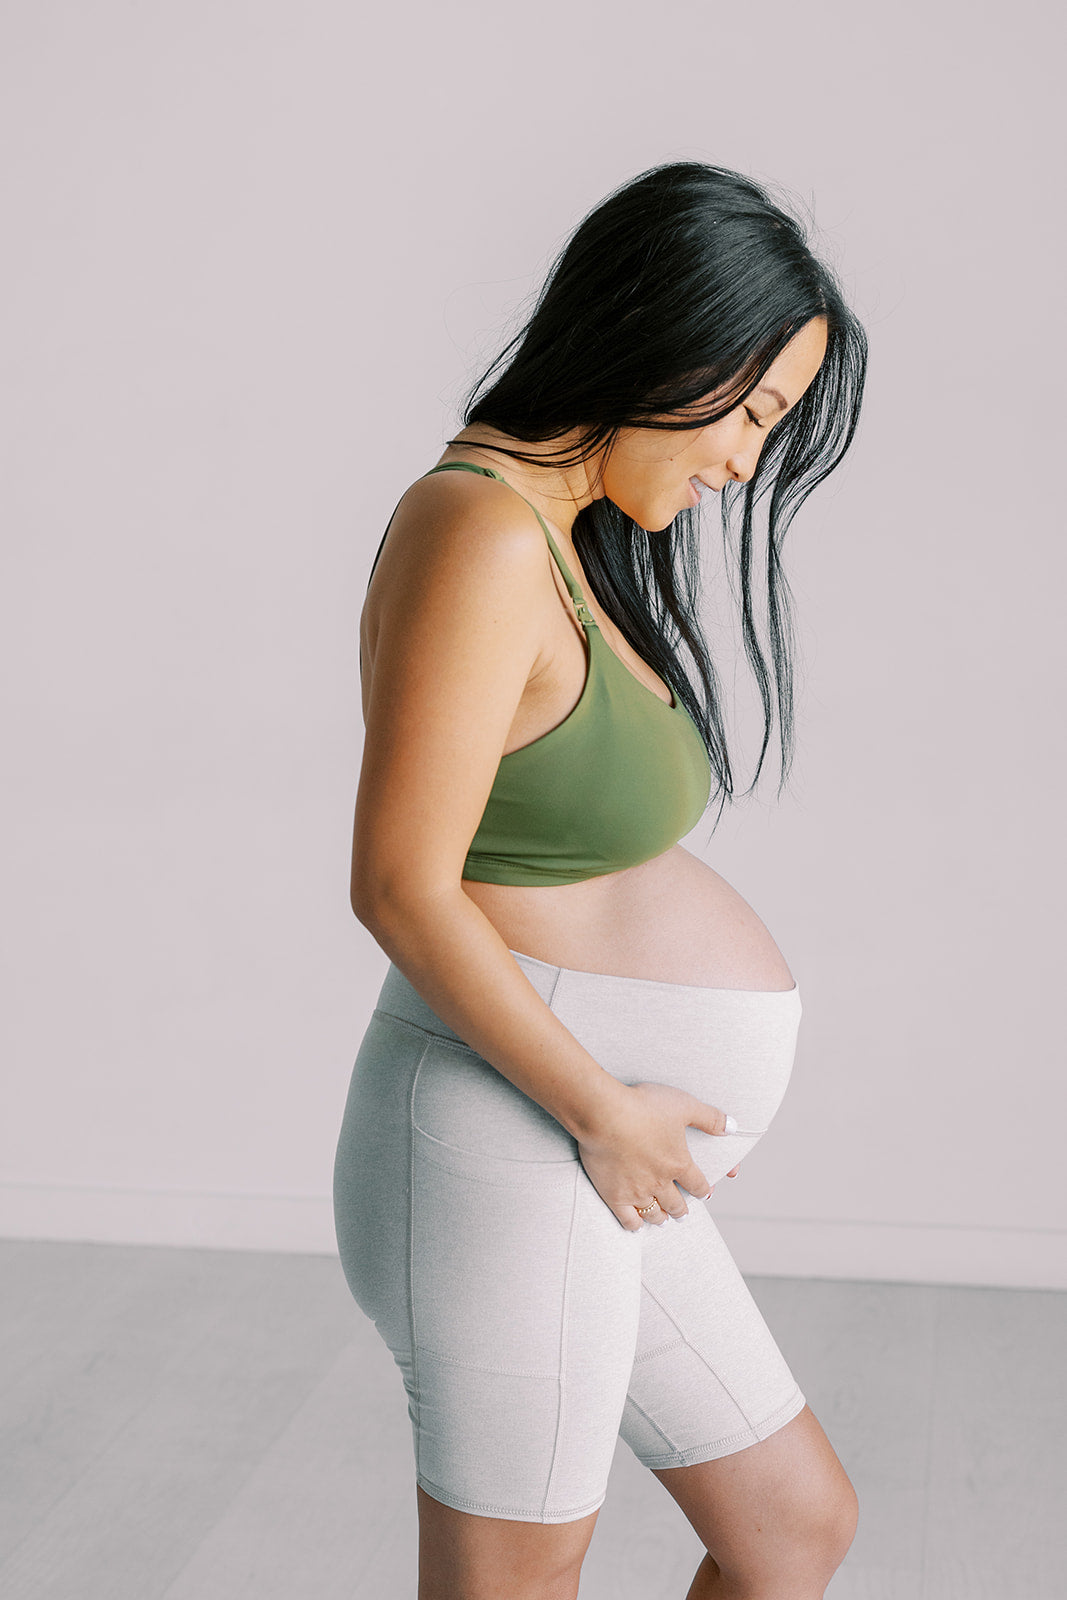 Versatile Maternity Shorts for Comfort and Style – Anook Athletics